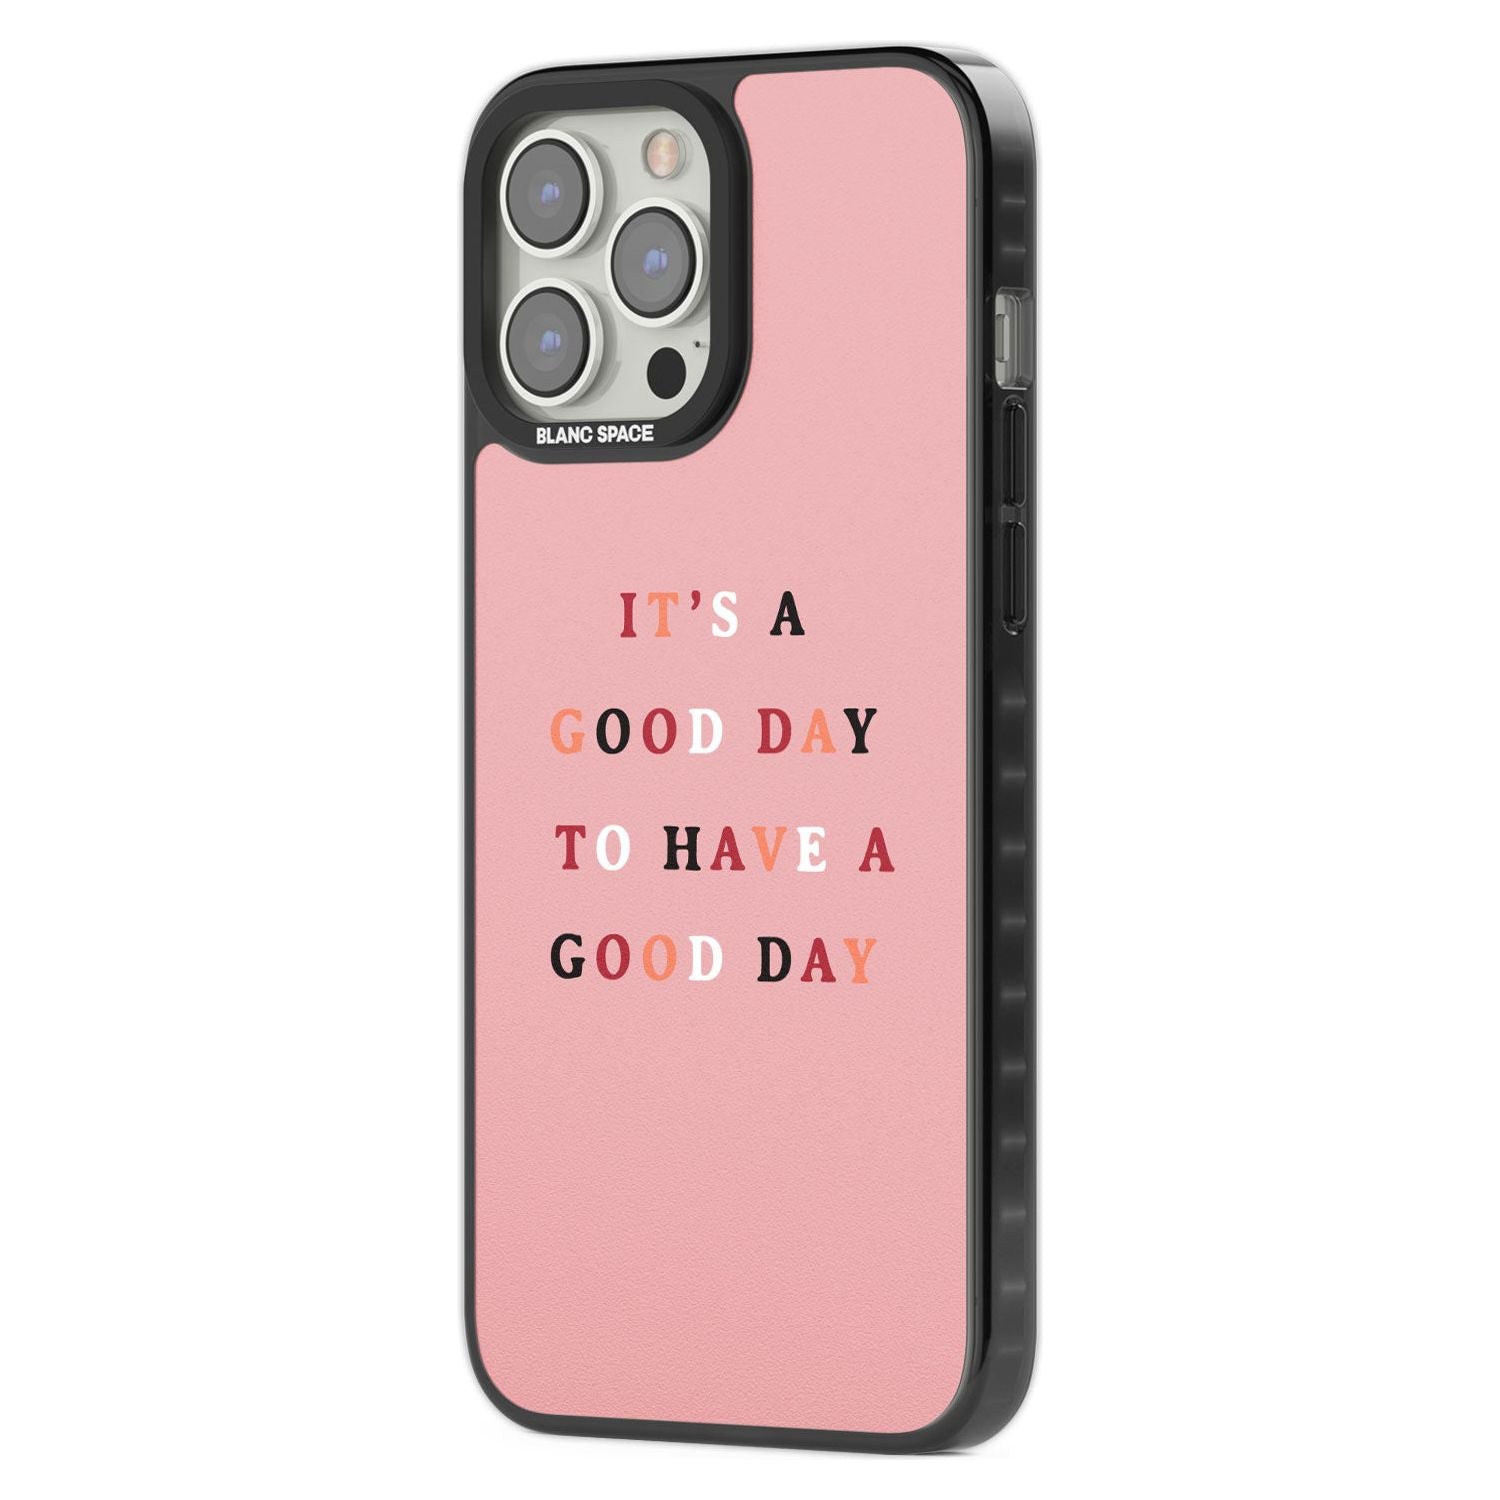 It's a good day to have a good day Phone Case iPhone 15 Pro Max / Black Impact Case,iPhone 15 Plus / Black Impact Case,iPhone 15 Pro / Black Impact Case,iPhone 15 / Black Impact Case,iPhone 15 Pro Max / Impact Case,iPhone 15 Plus / Impact Case,iPhone 15 Pro / Impact Case,iPhone 15 / Impact Case,iPhone 15 Pro Max / Magsafe Black Impact Case,iPhone 15 Plus / Magsafe Black Impact Case,iPhone 15 Pro / Magsafe Black Impact Case,iPhone 15 / Magsafe Black Impact Case,iPhone 14 Pro Max / Black Impact Case,iPhone 14